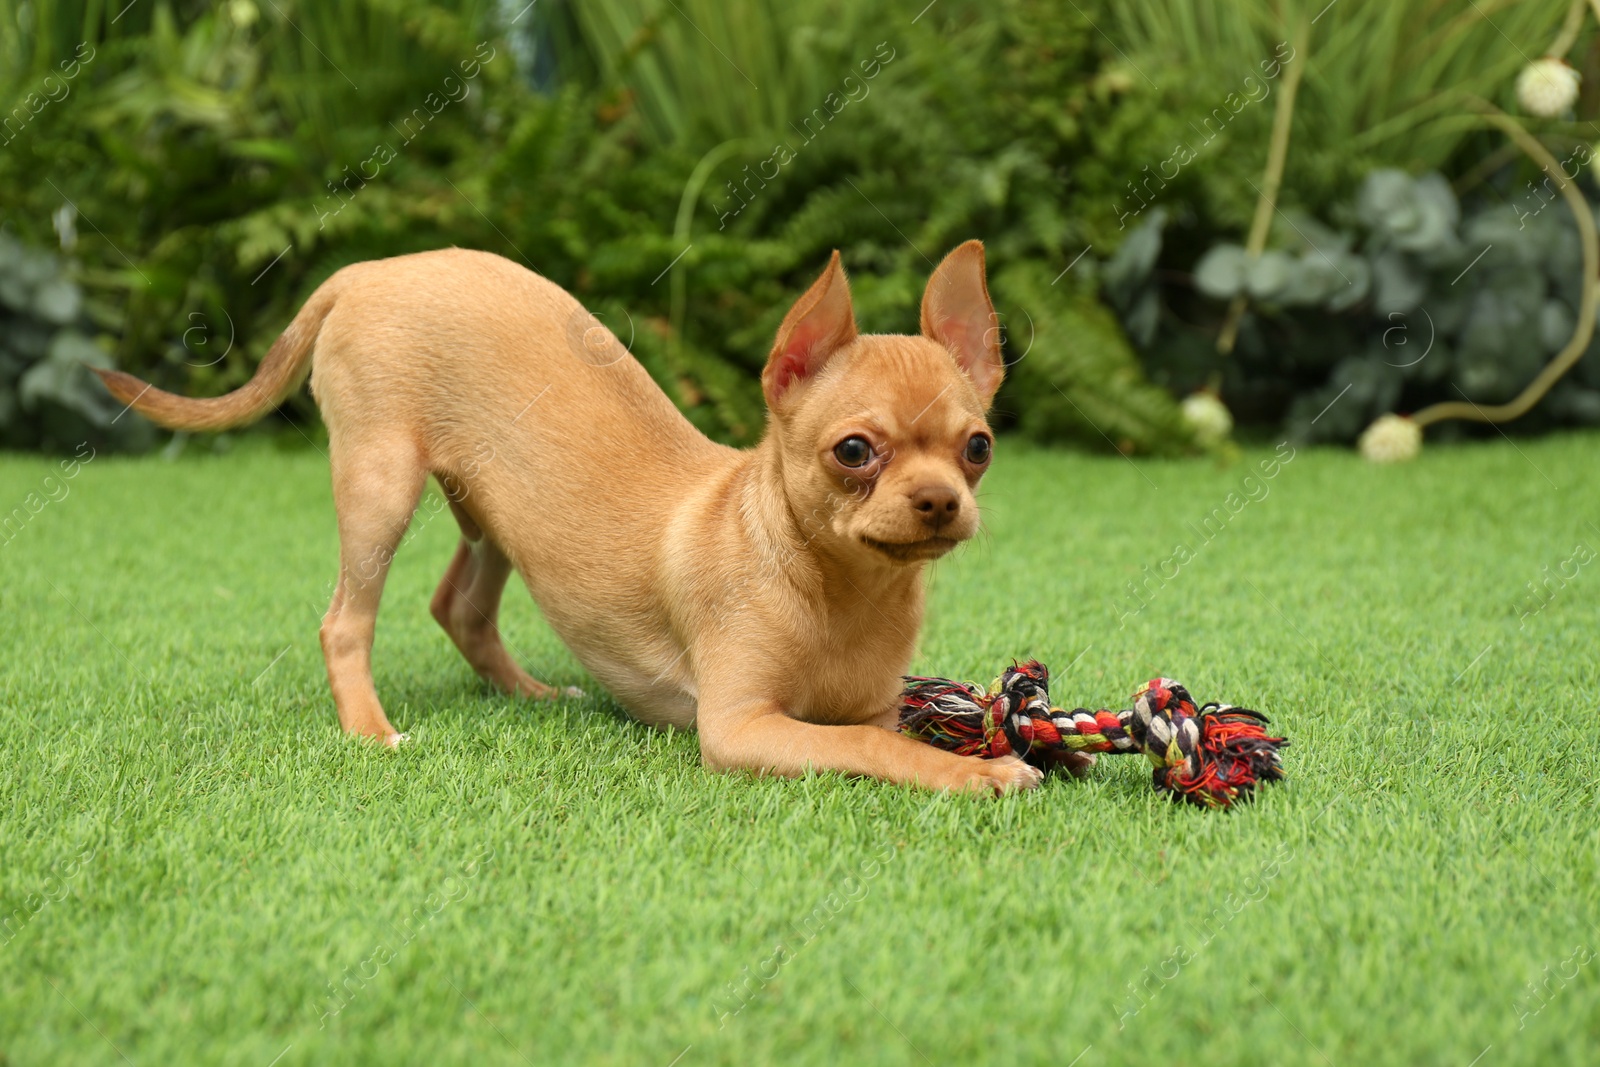 Photo of Cute Chihuahua puppy playing with toy on green grass outdoors. Baby animal